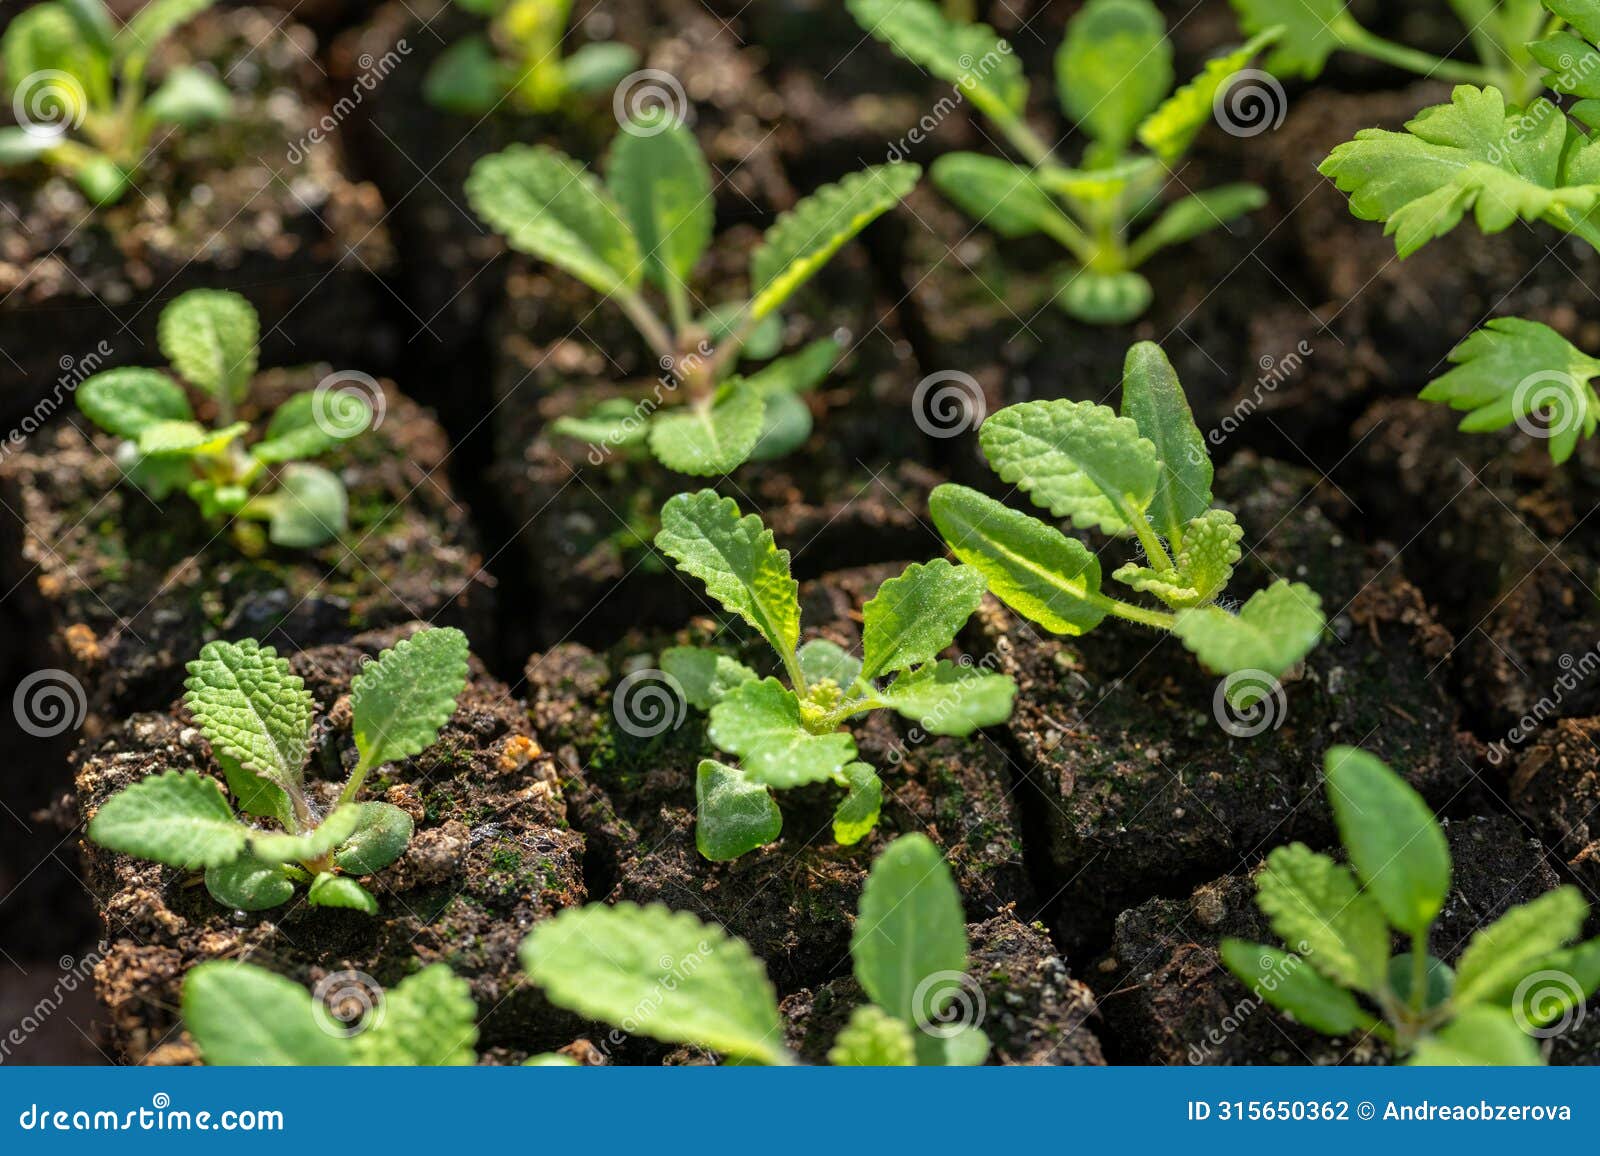 salvia seedlings in soil blocks. soil blocking is a seed starting technique that relies on planting seeds in cubes of soil.